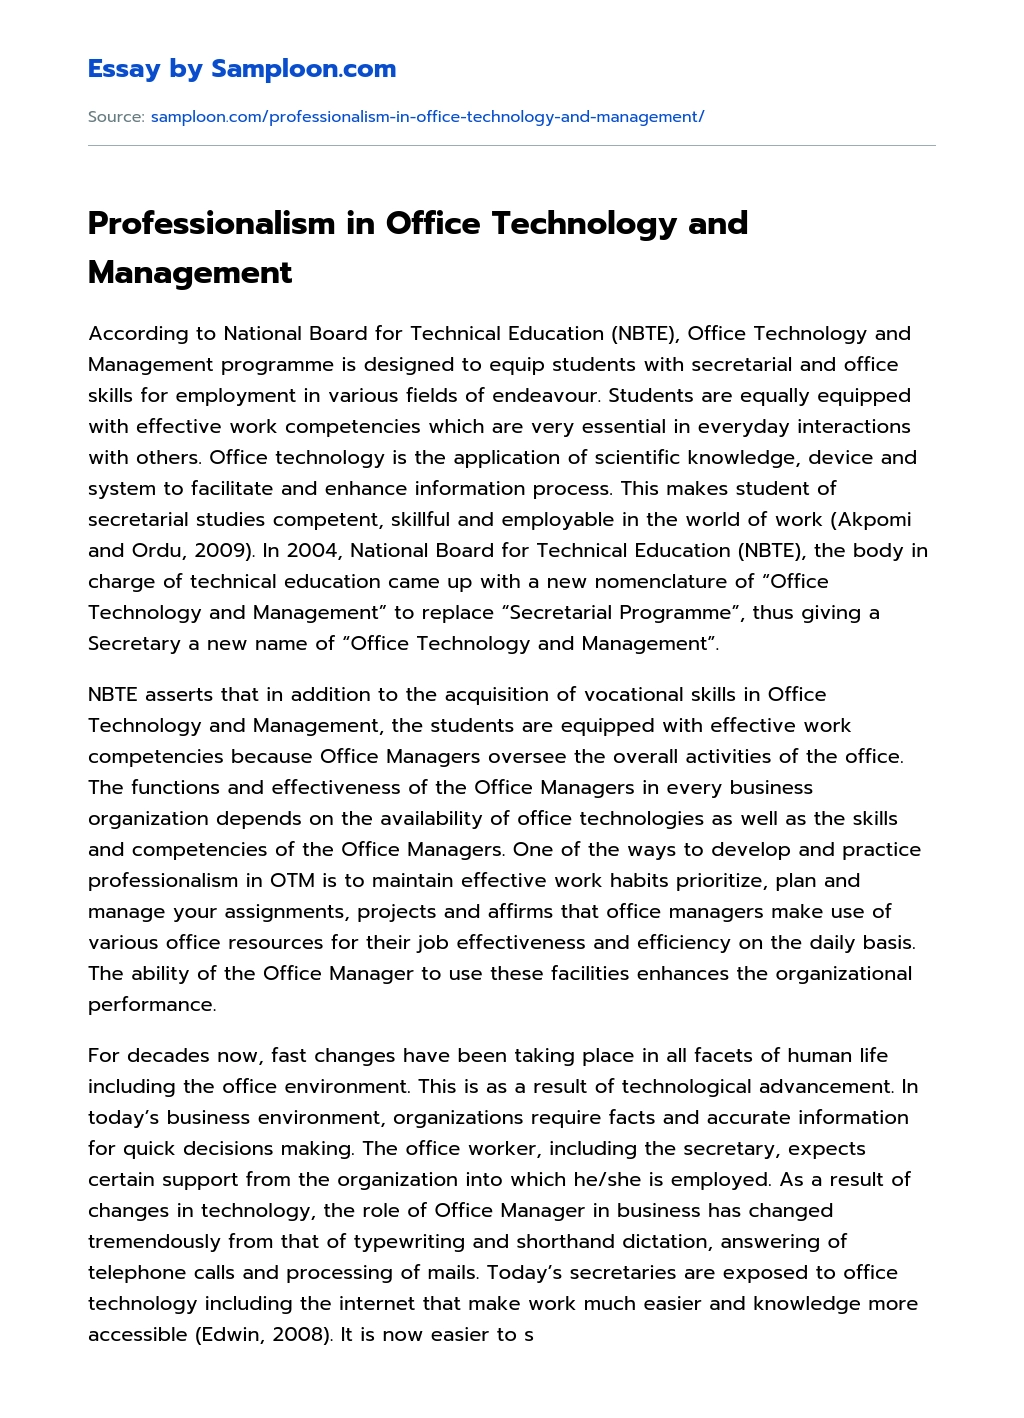 Professionalism in Office Technology and Management Argumentative Essay essay